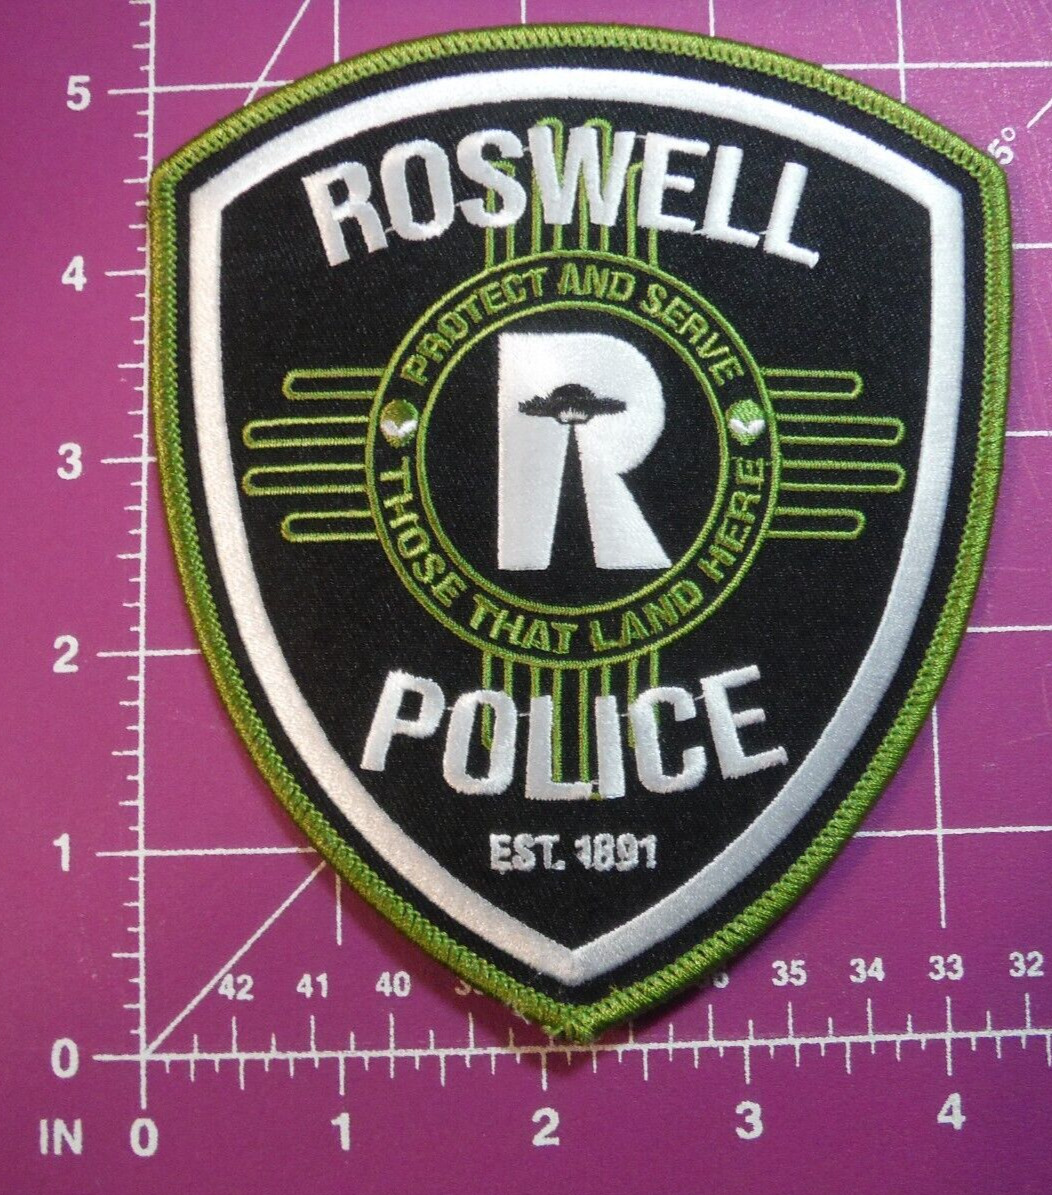 Roswell New Mexico Police-novelty UFO patch